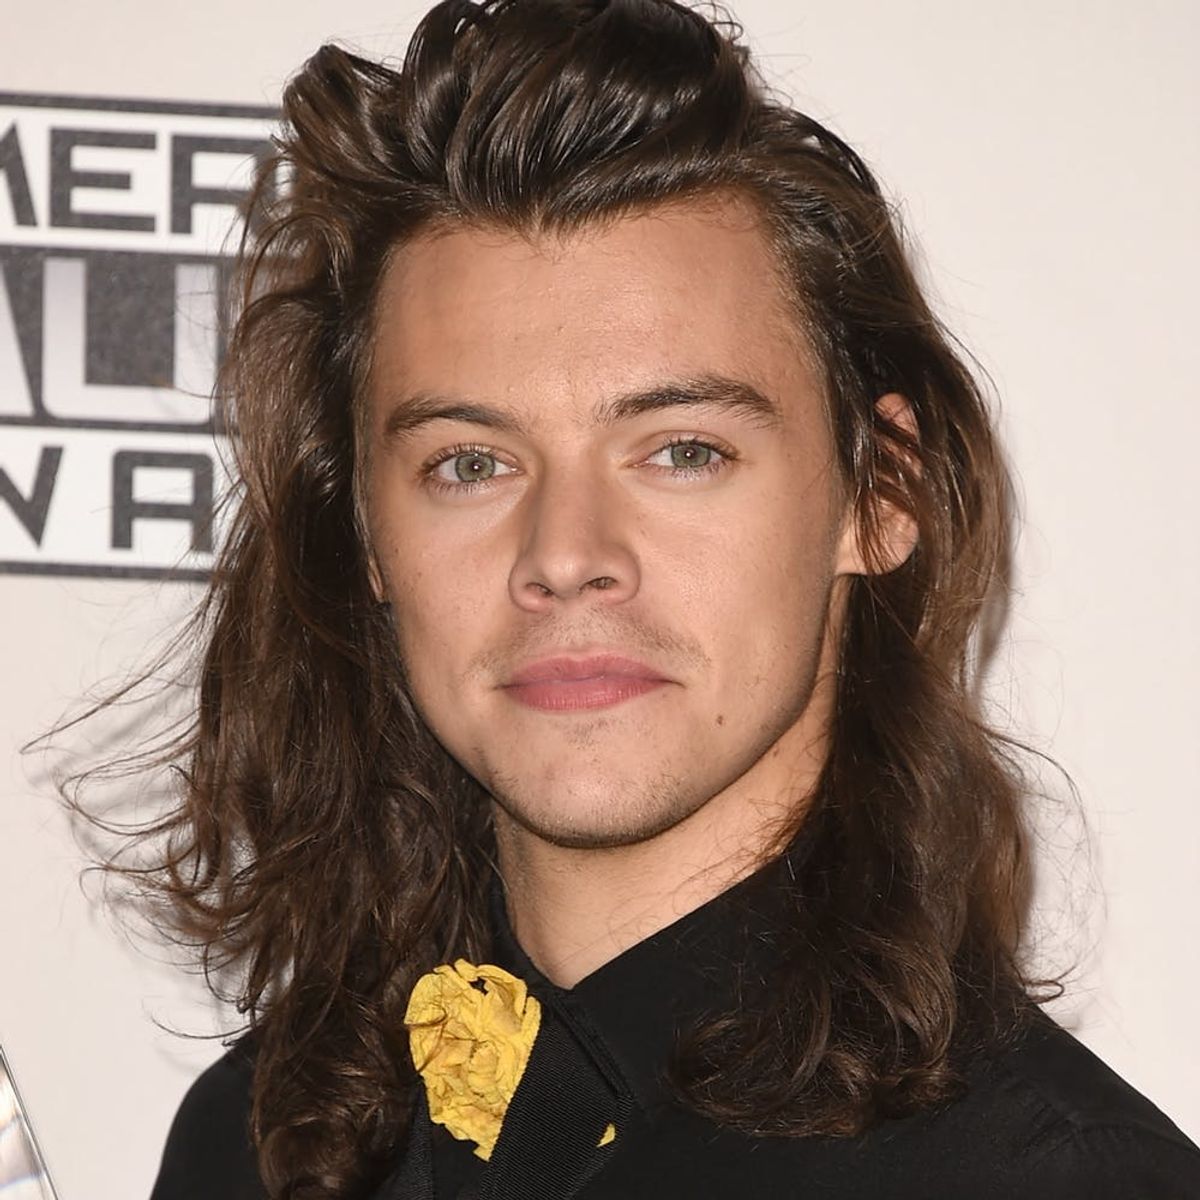 Harry Styles Just Cut Off His Trademark Locks for This Super Sweet Reason